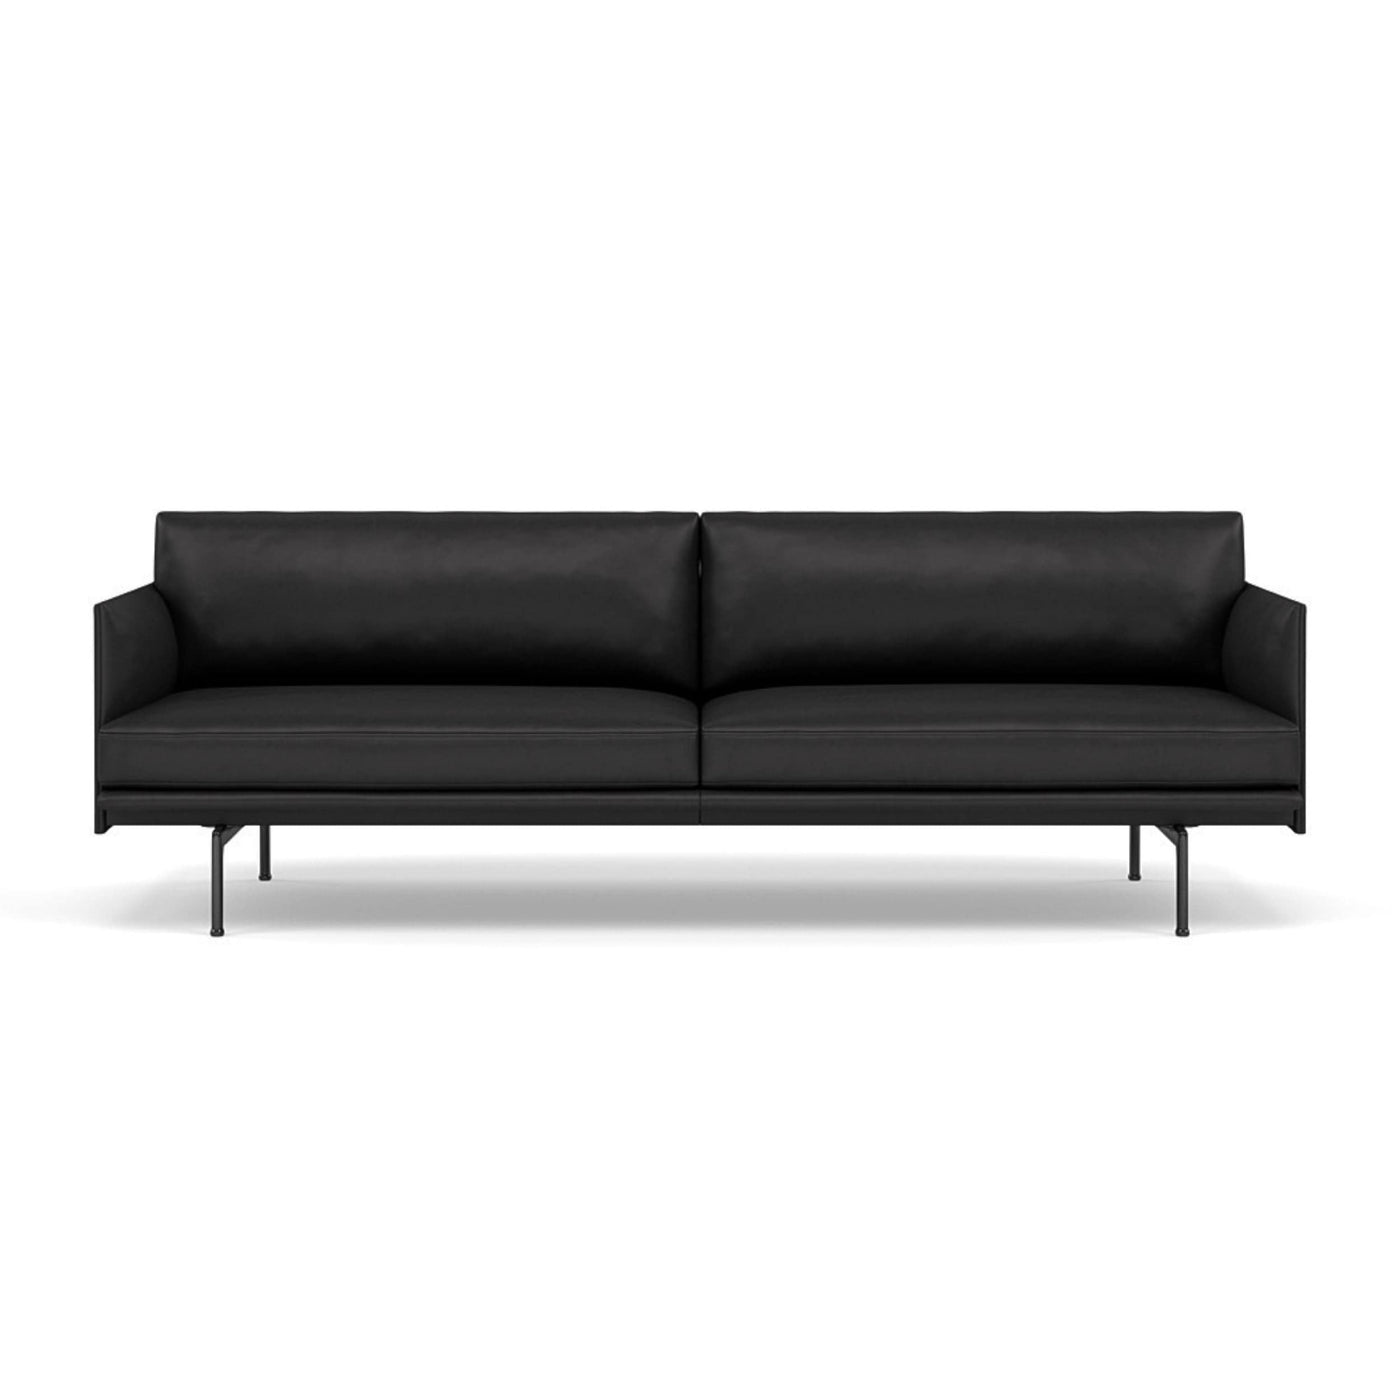 Muuto Outline  Studio Sofa 220 in black refine leather and black legs. Made to order from someday designs. #colour_black-refine-leather